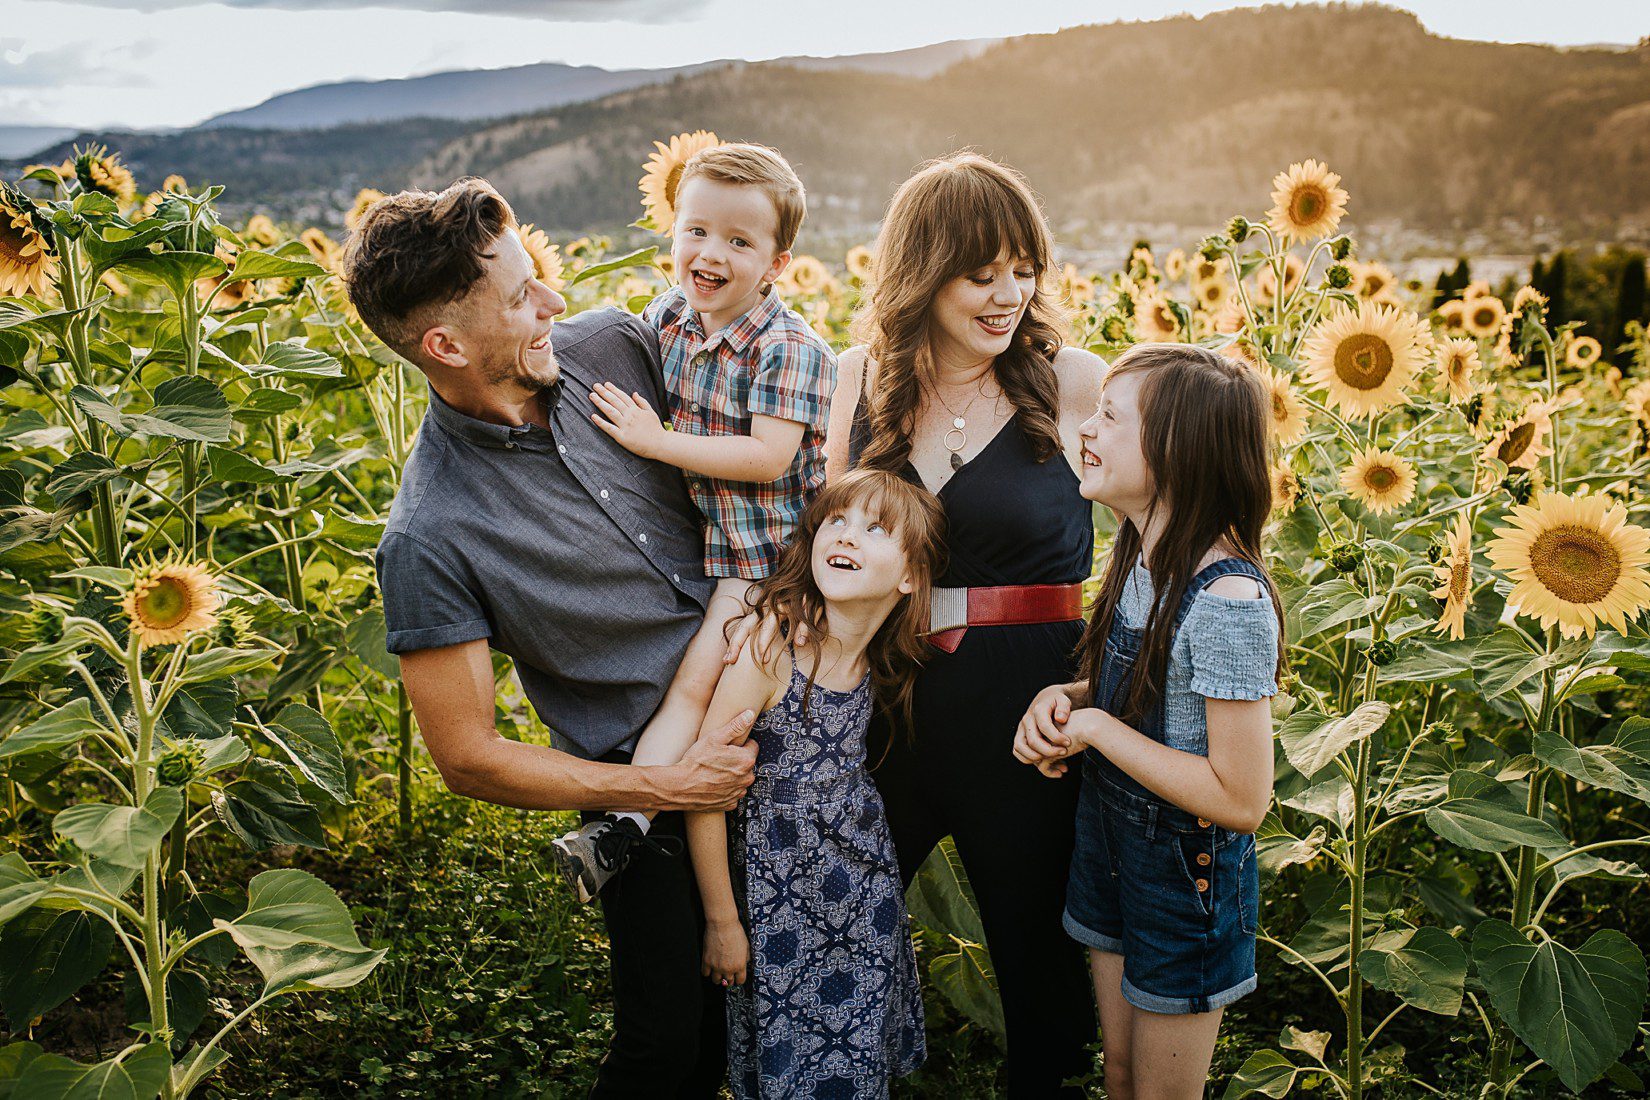 Barnett Photography shows you what to wear for your family photo session